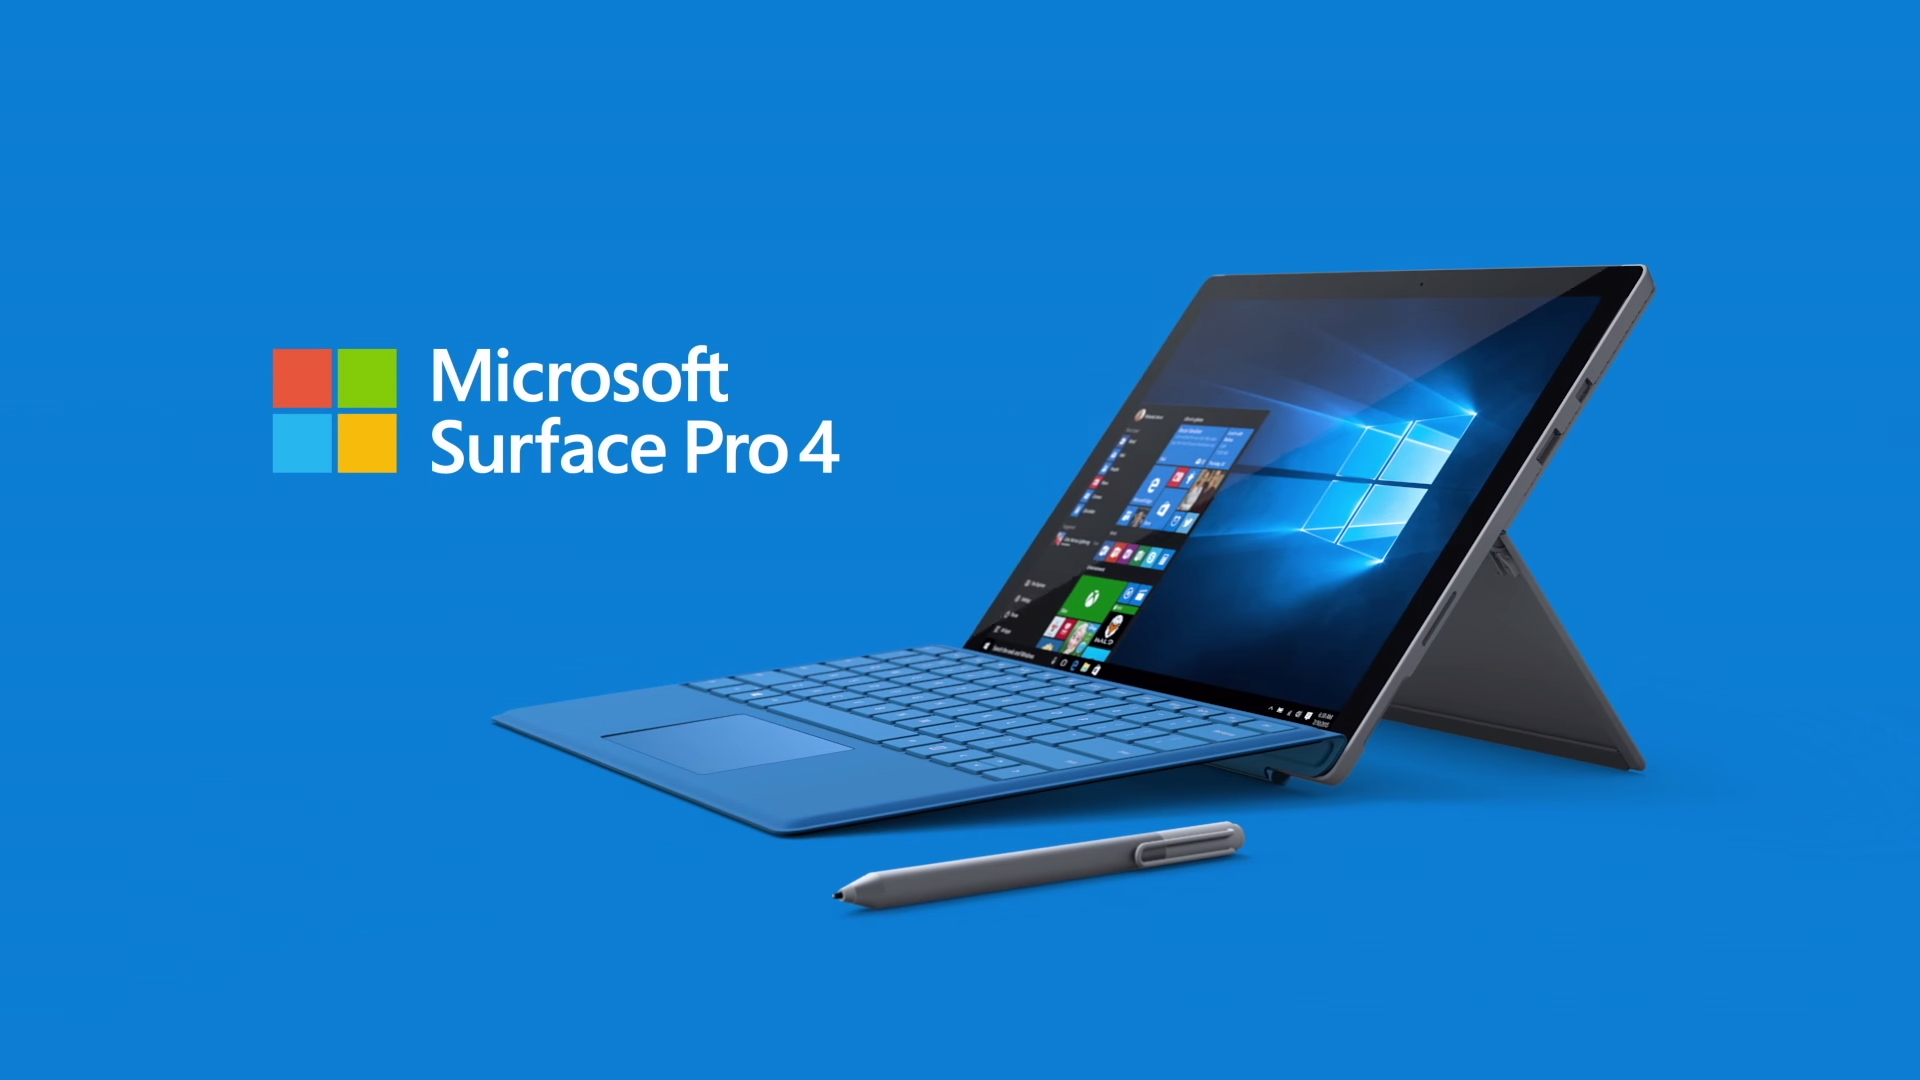 Microsoft offers big discounts for Surface Pro 4 tablets